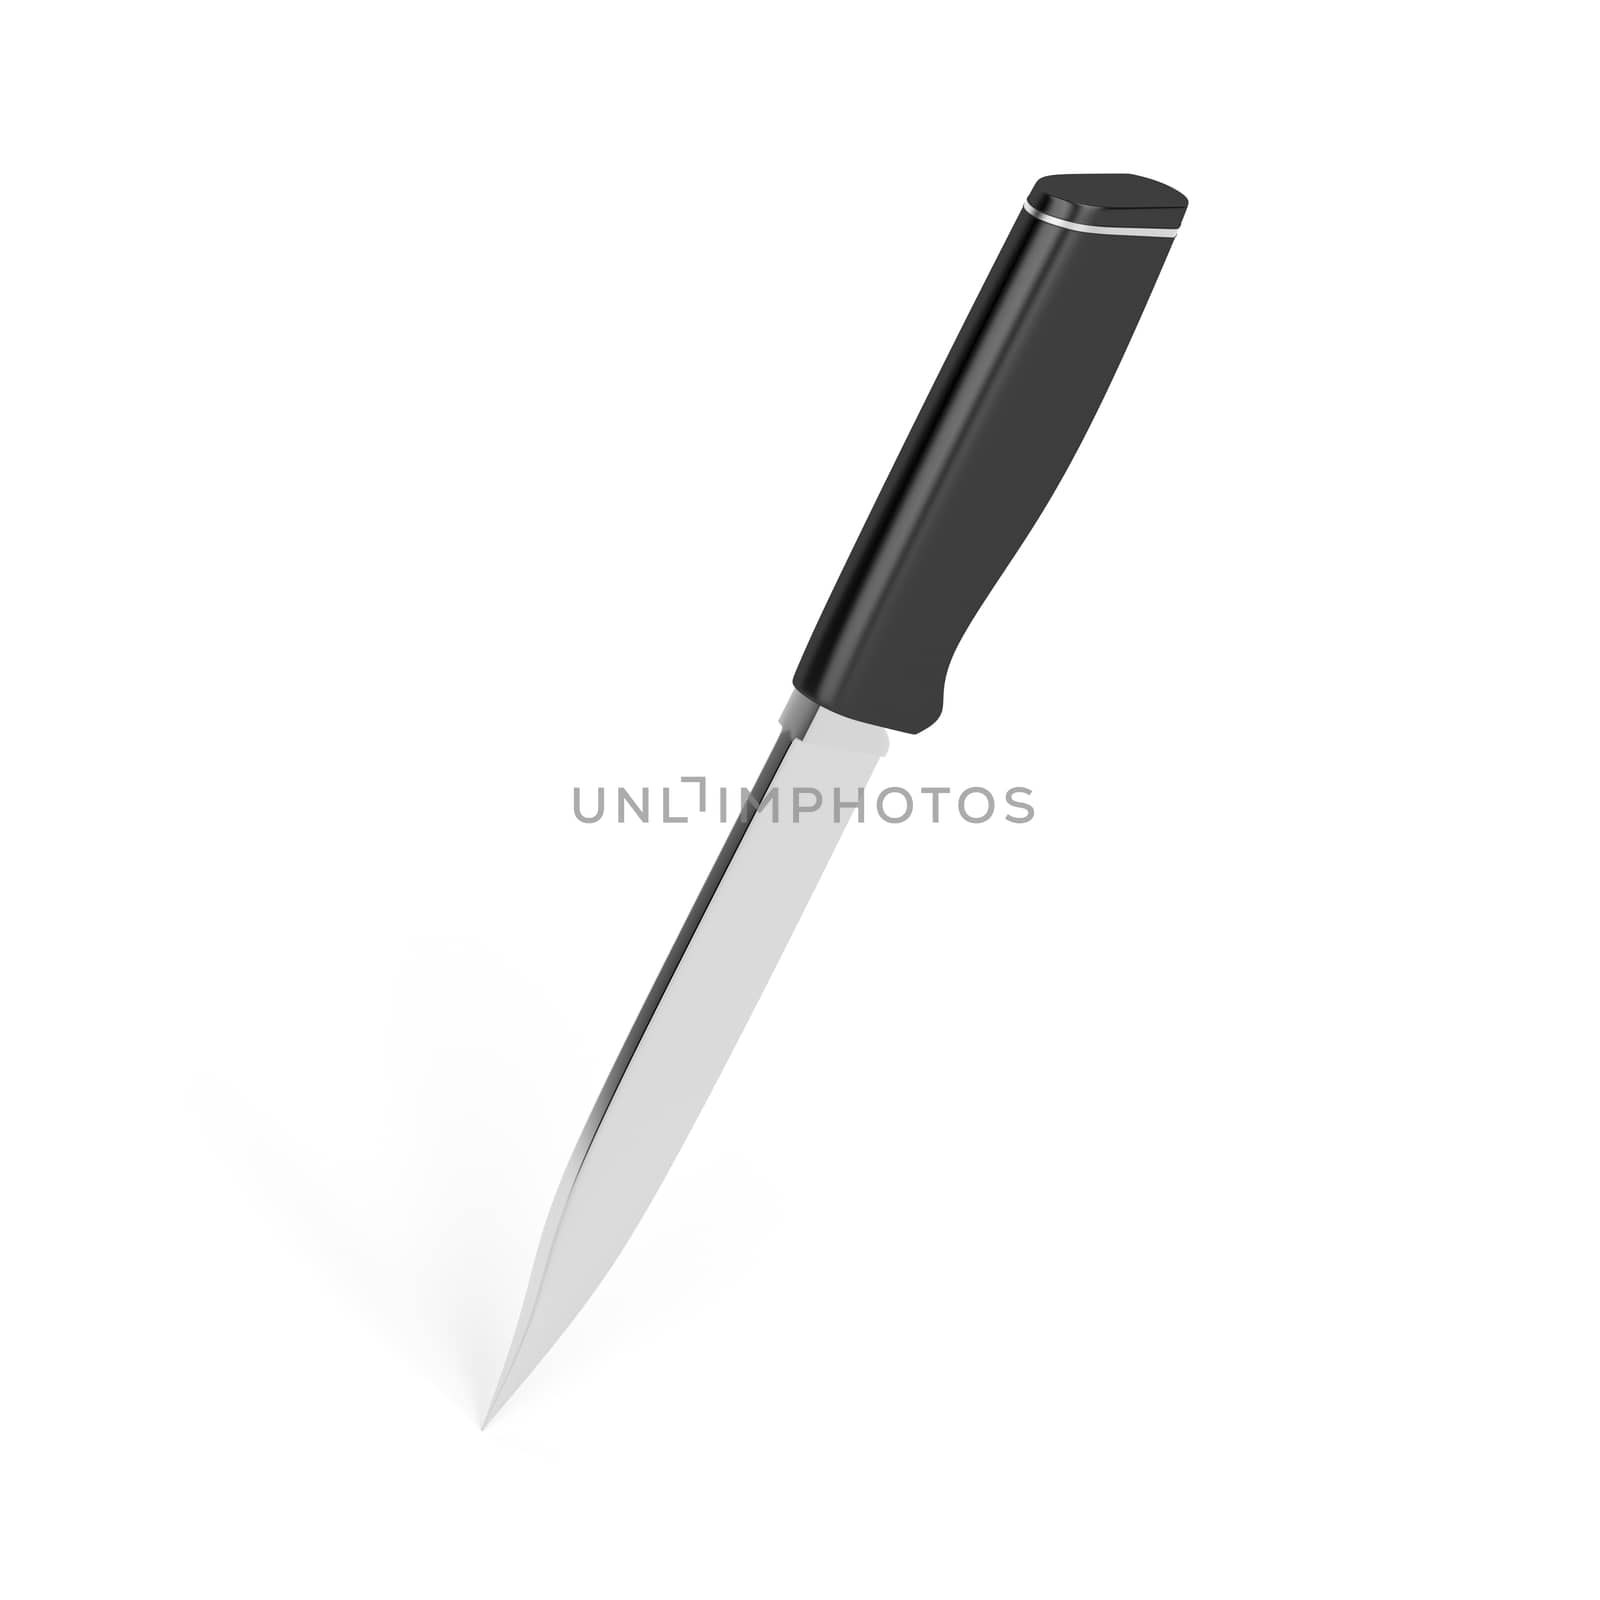 Chef's knife by magraphics